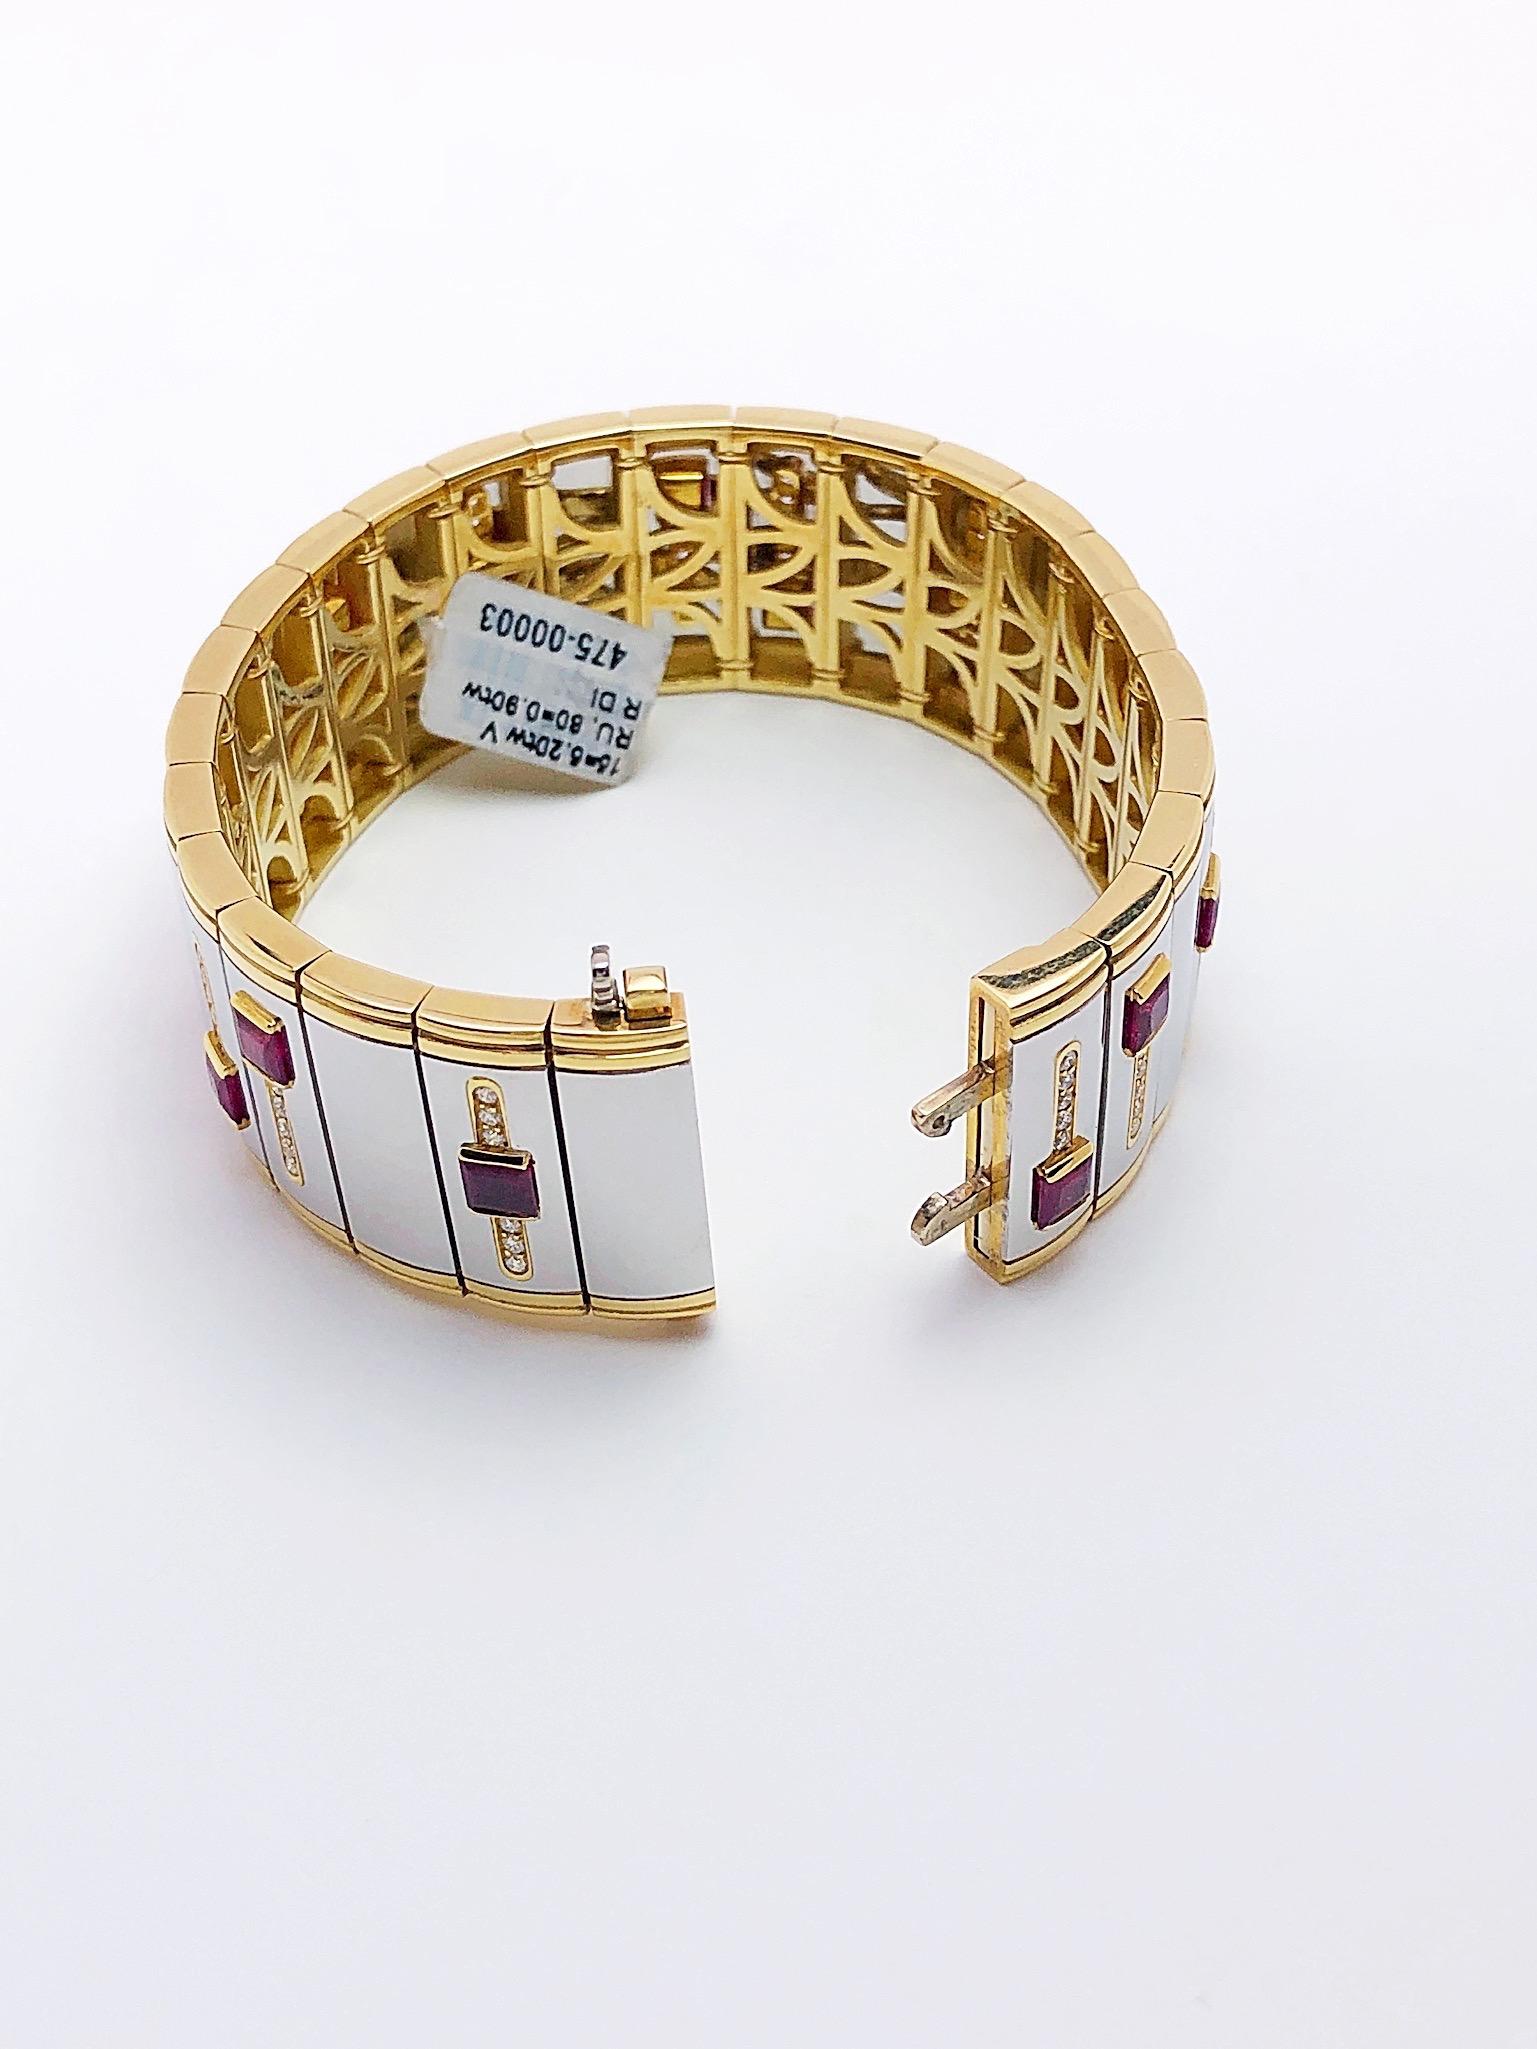 Art Deco Michael Bondanza Platinum and 18KT Yellow Gold Bracelet with Rubies and Diamonds For Sale